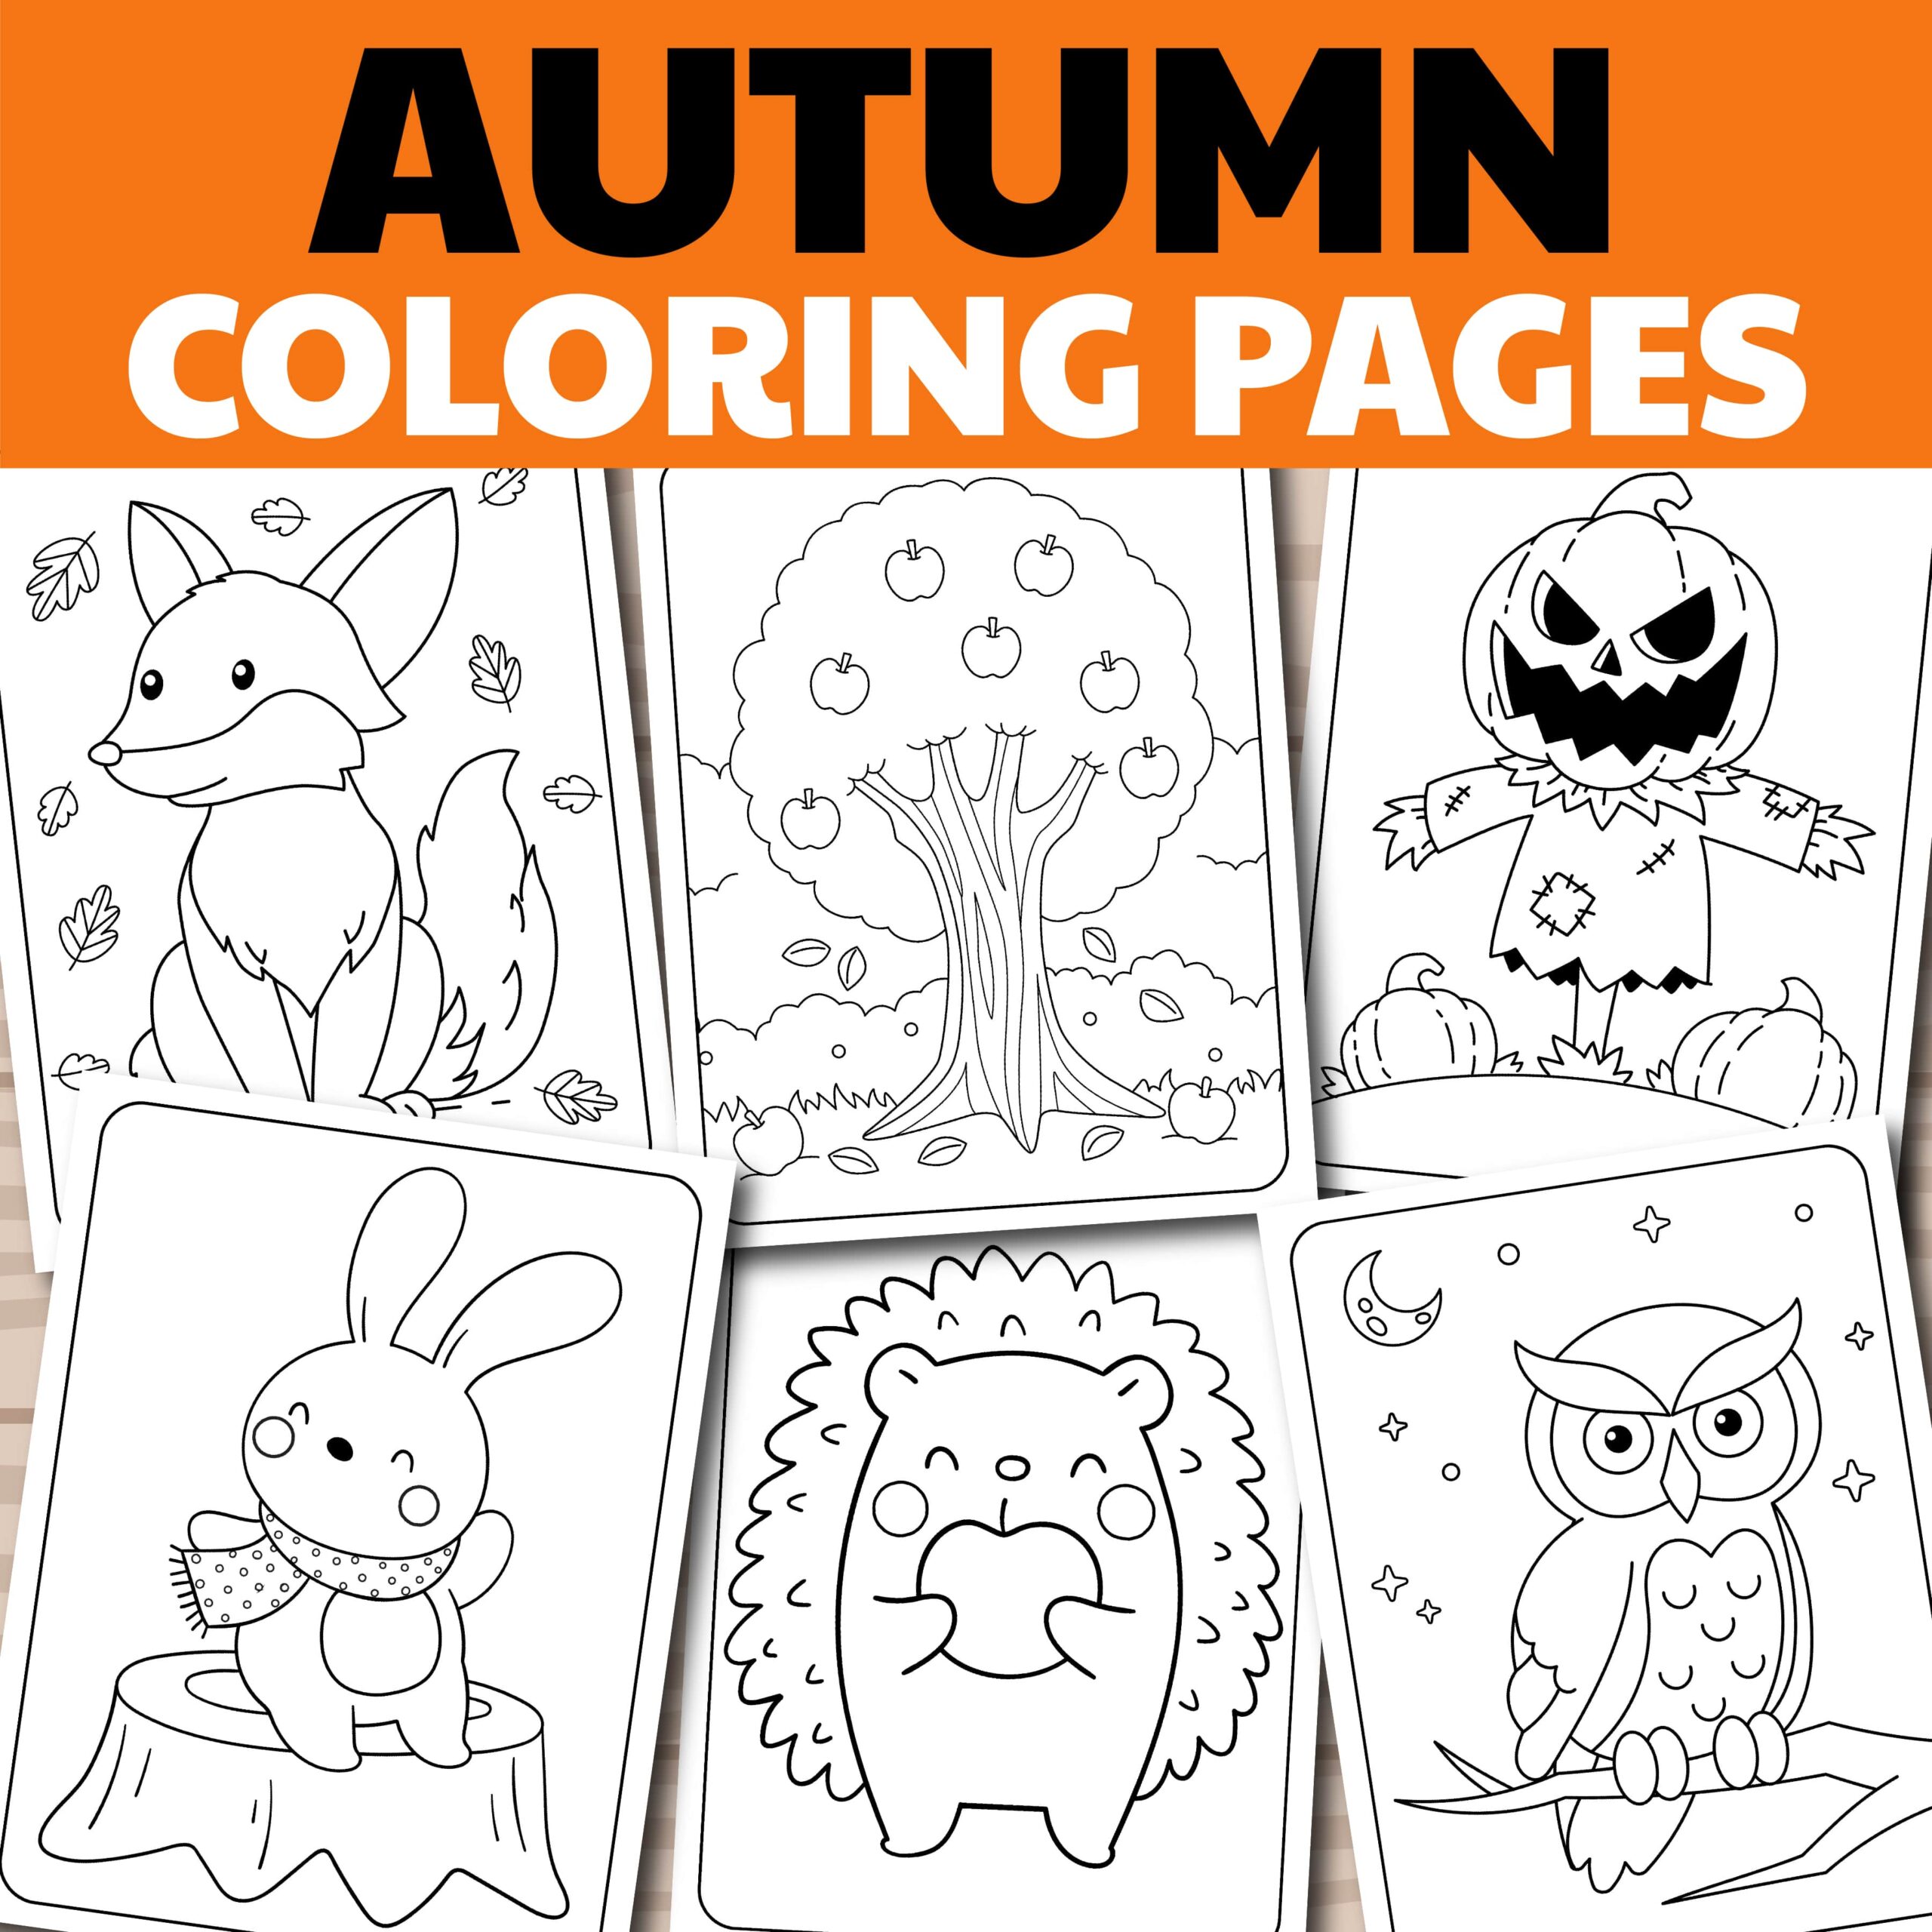 Fall coloring pages autumn coloring pages fall printable printable coloring pages made by teachers